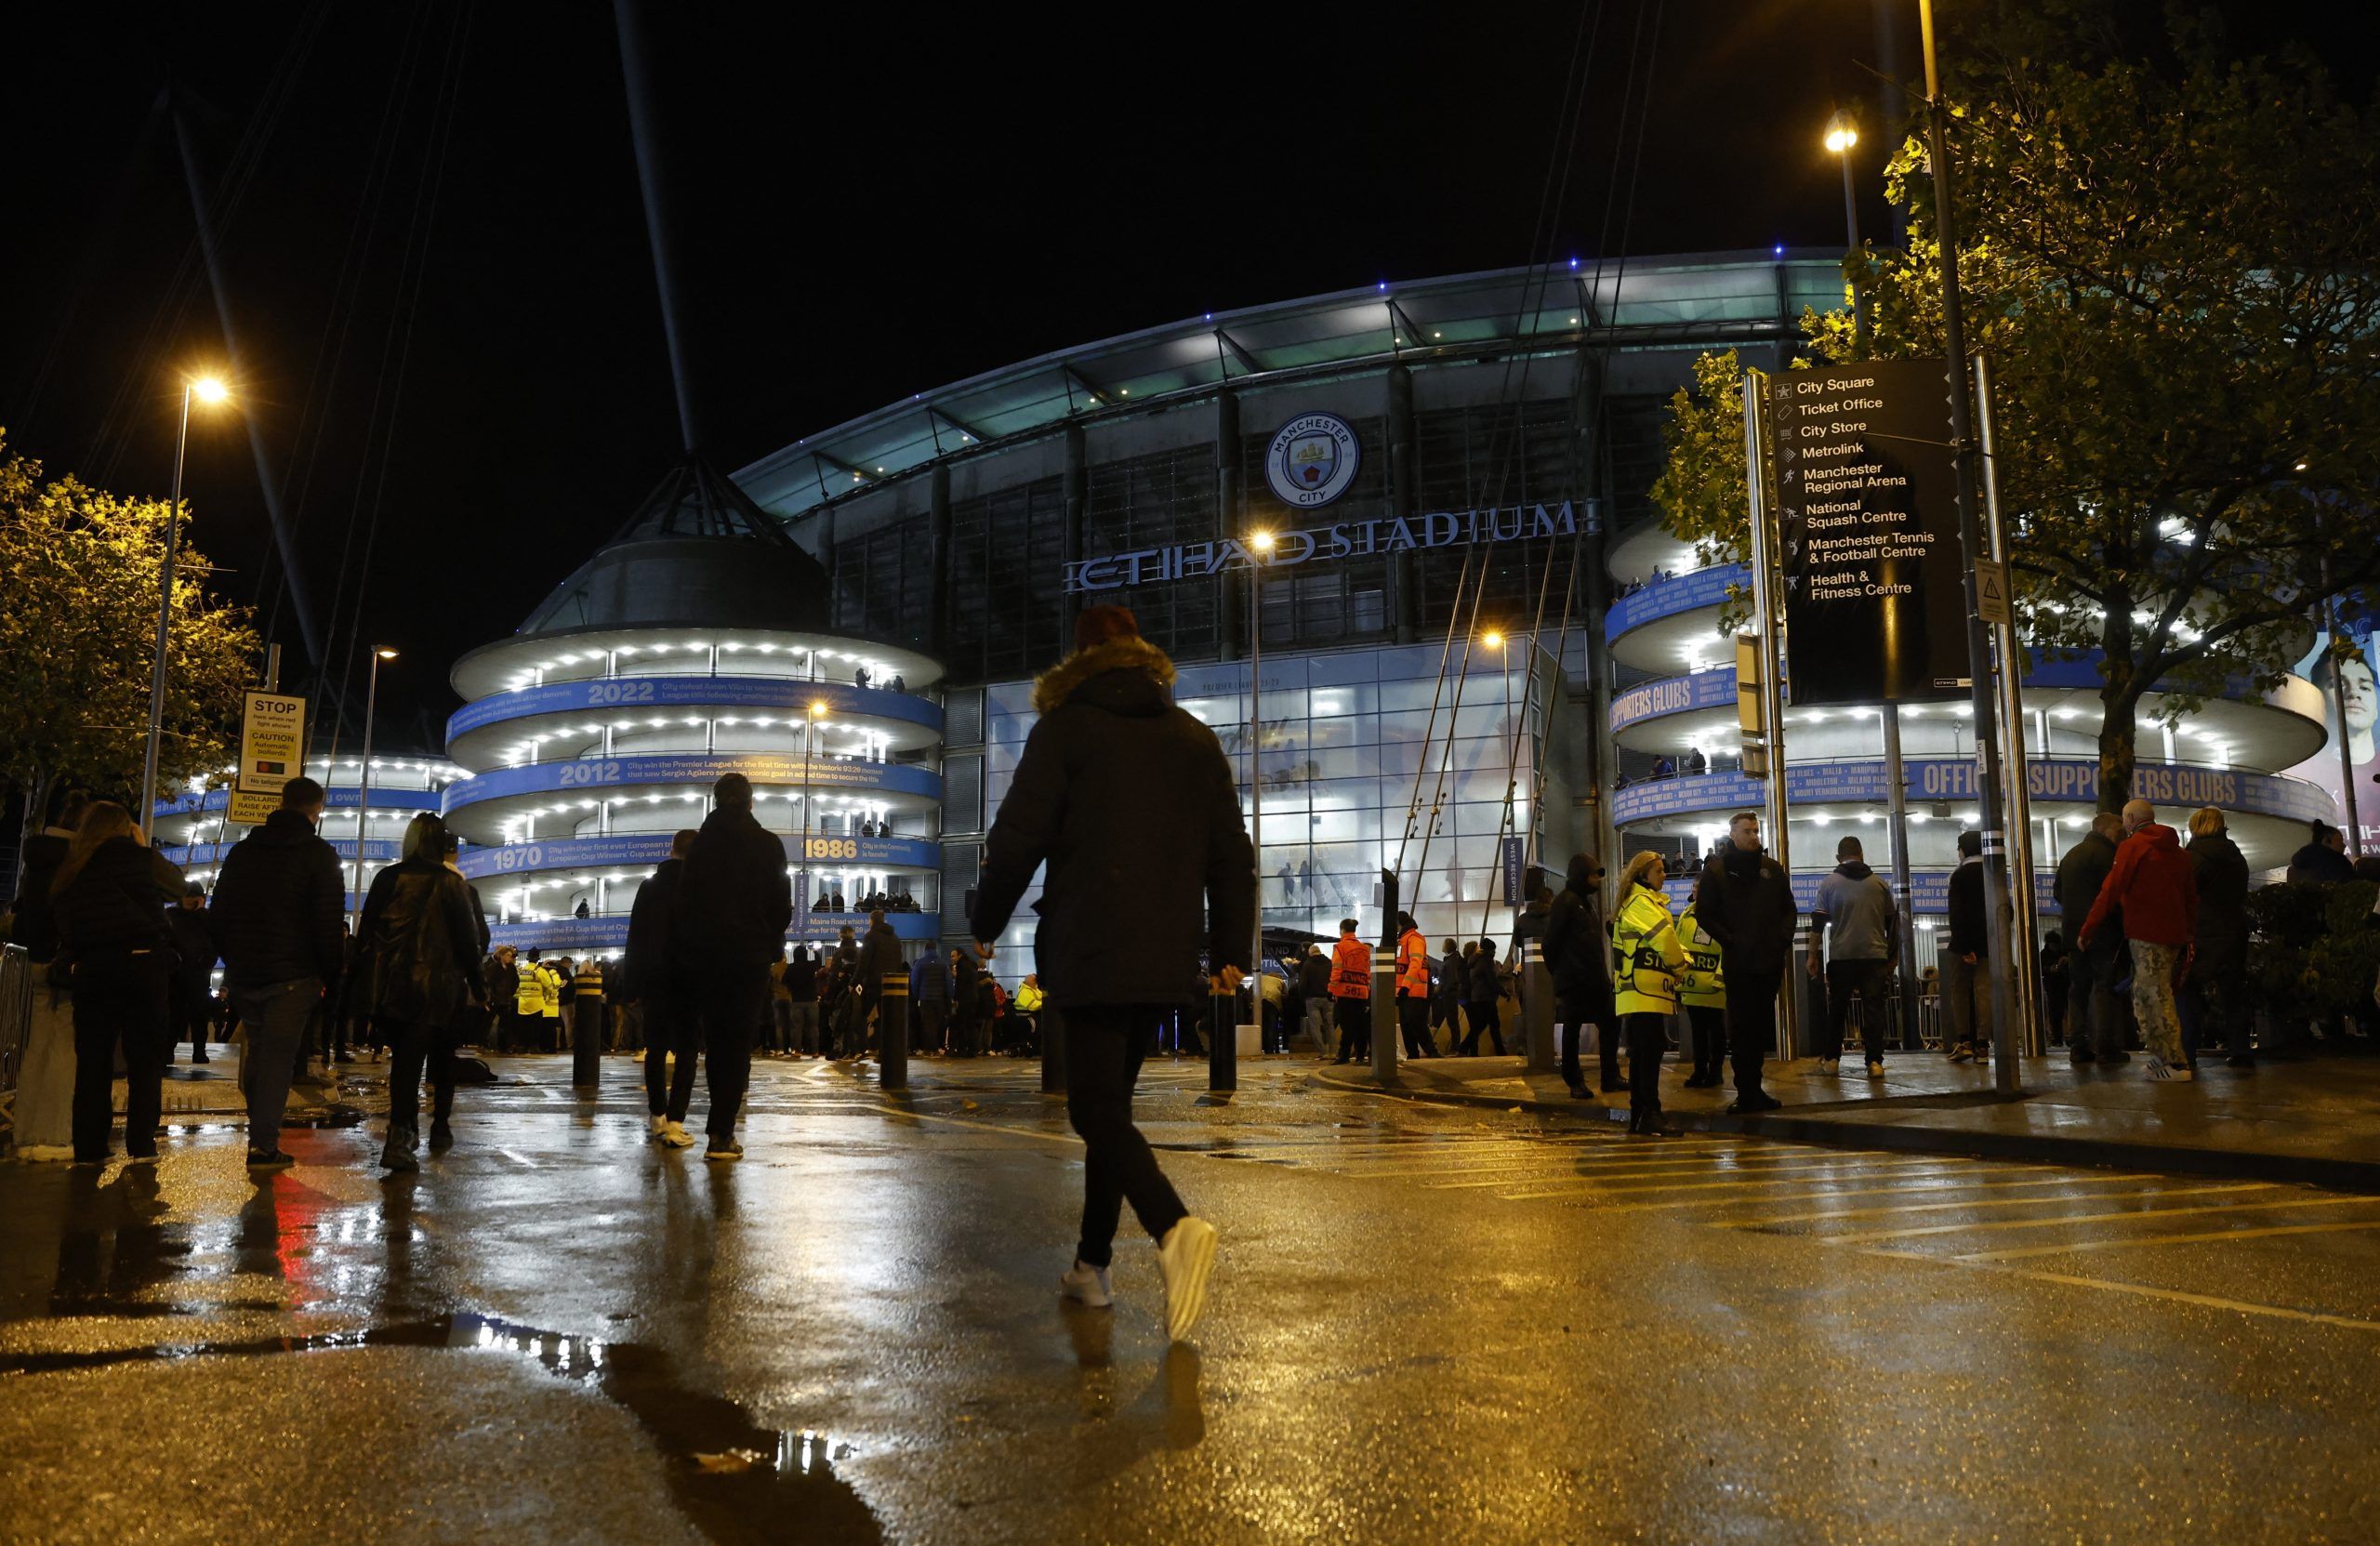 Soccer Football - Champions League - Group G - Manchester City v Sevilla - Etihad Stadium, Manchester, Britain - November 2, 2022 General view outside the stadium before the match Action Images via Reuters/Jason Cairnduff